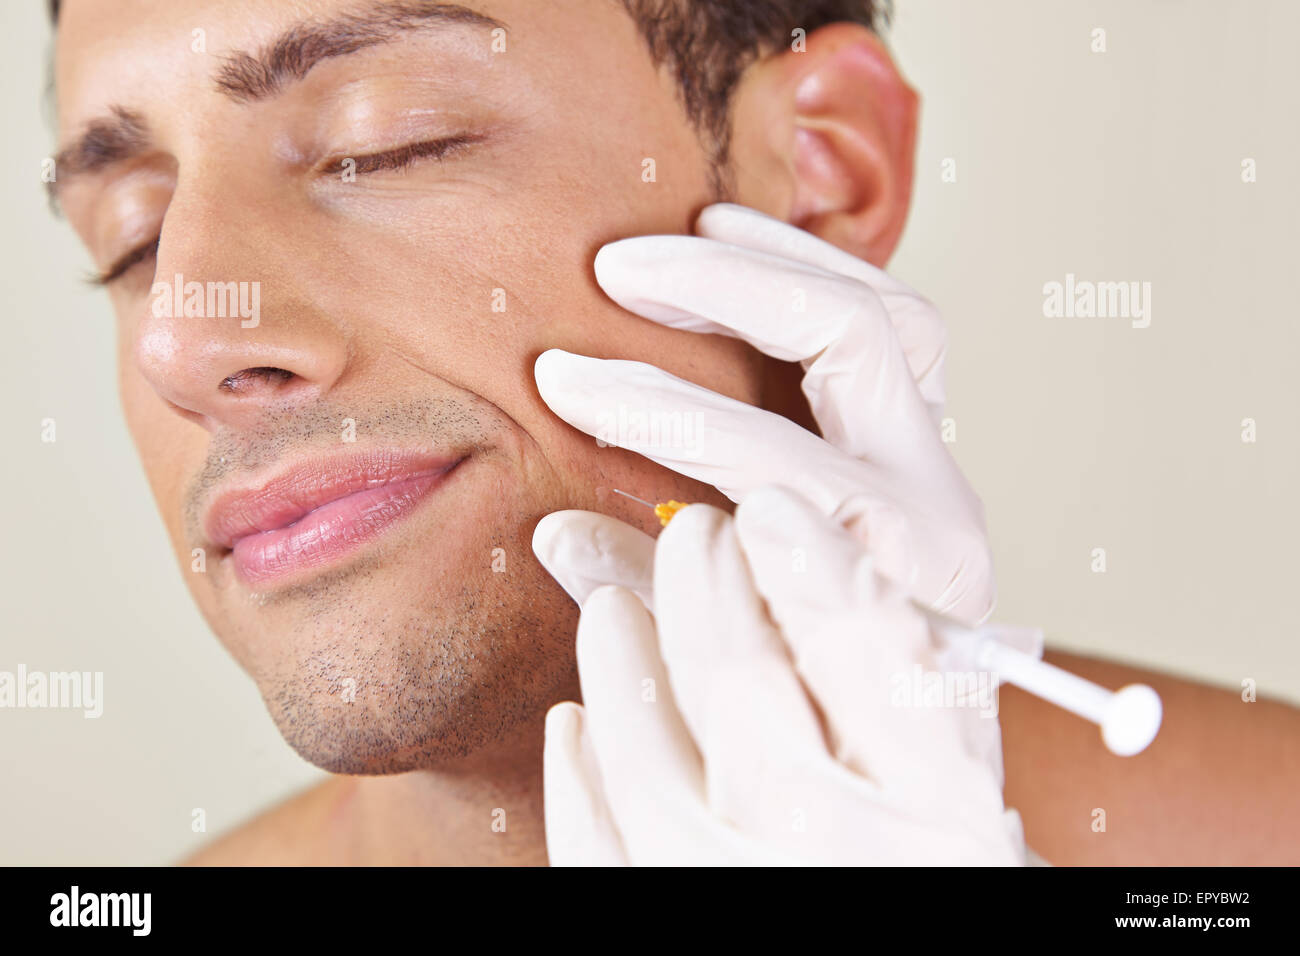 Man in a beauty clinic getting wrinkle treatment near his mouth Stock Photo